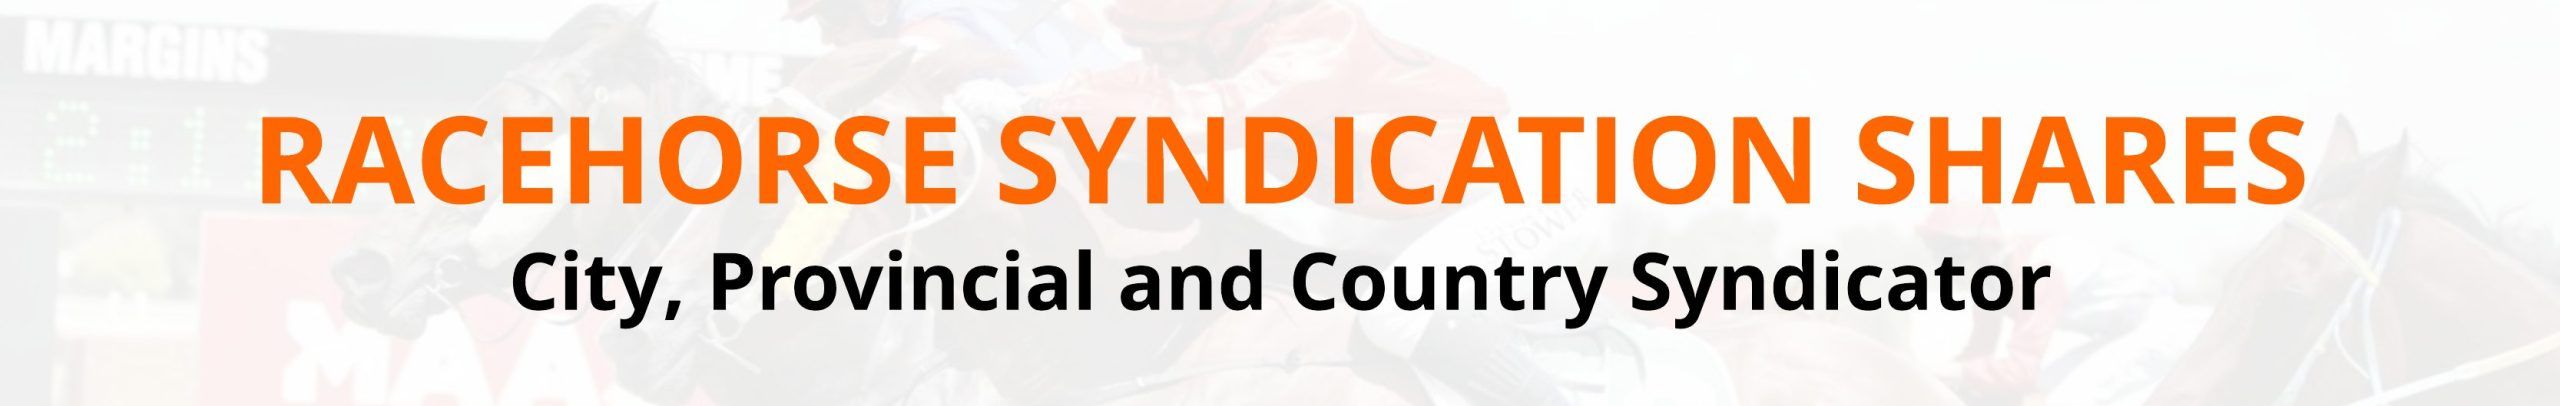 racehorse syndication shares